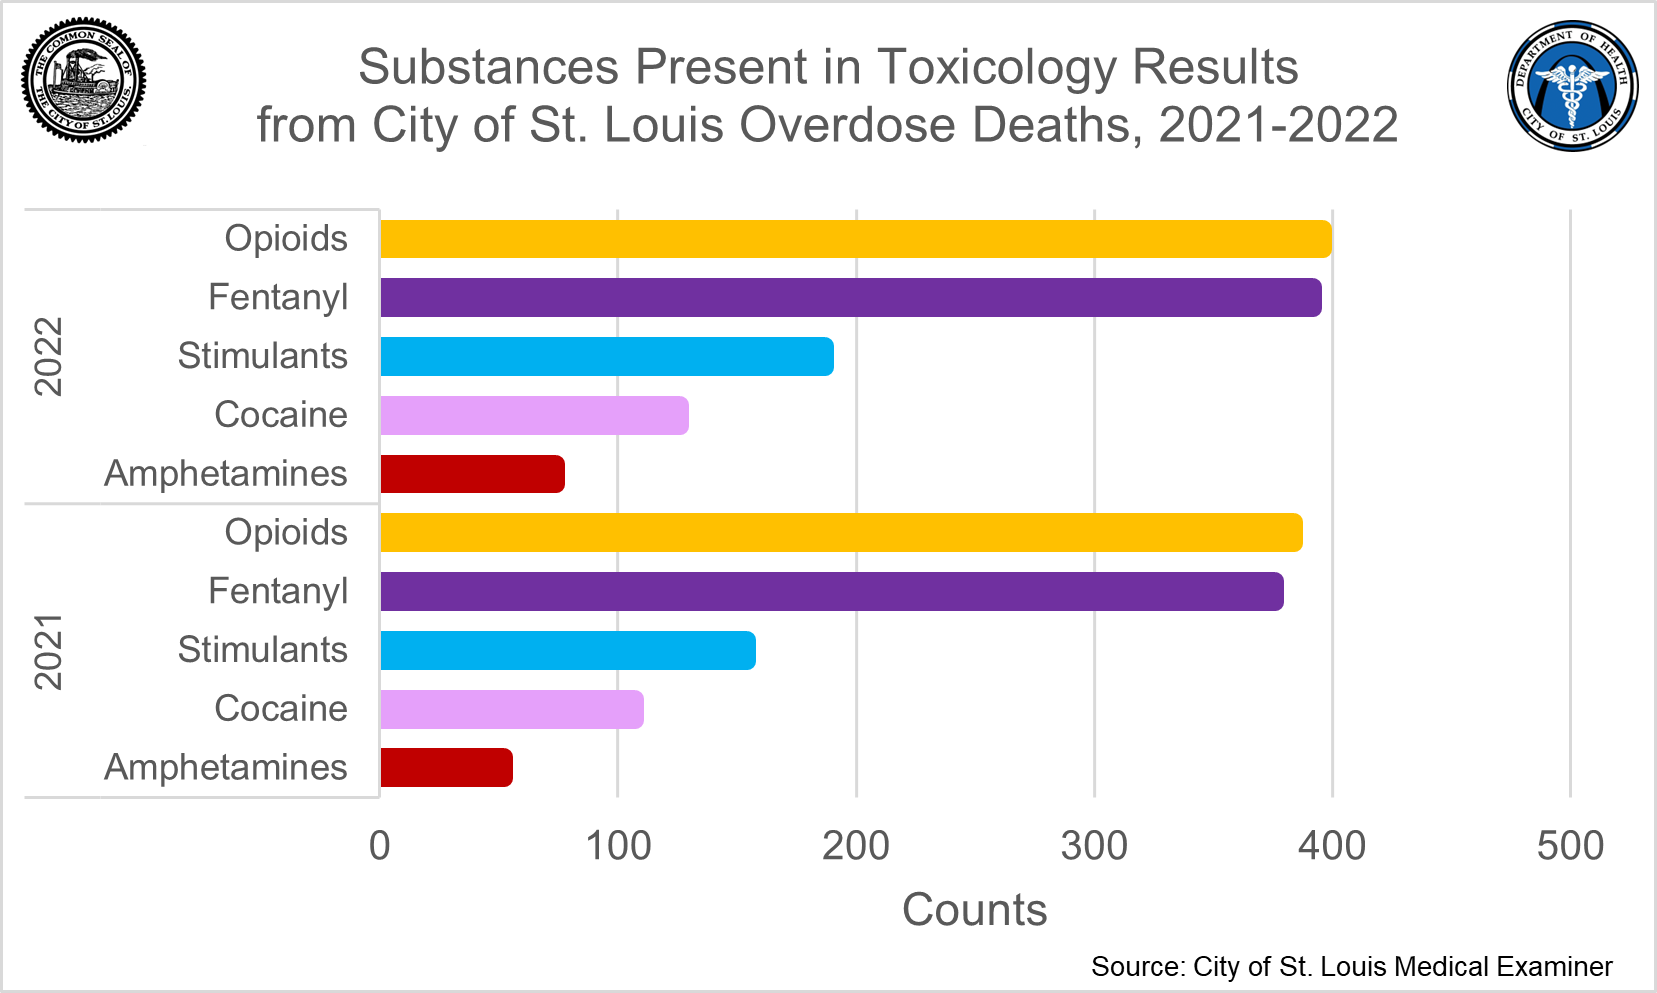 Alt text: A horizontal bar graphs shows overdose fatalities in the City of St. Louis for the years 2021 and 2022. The categories are broken down into Opioids and Stimulants, Opioids Alone, Fentanyl, Stimulants Alone, Cocaine, and Amphetamines. 